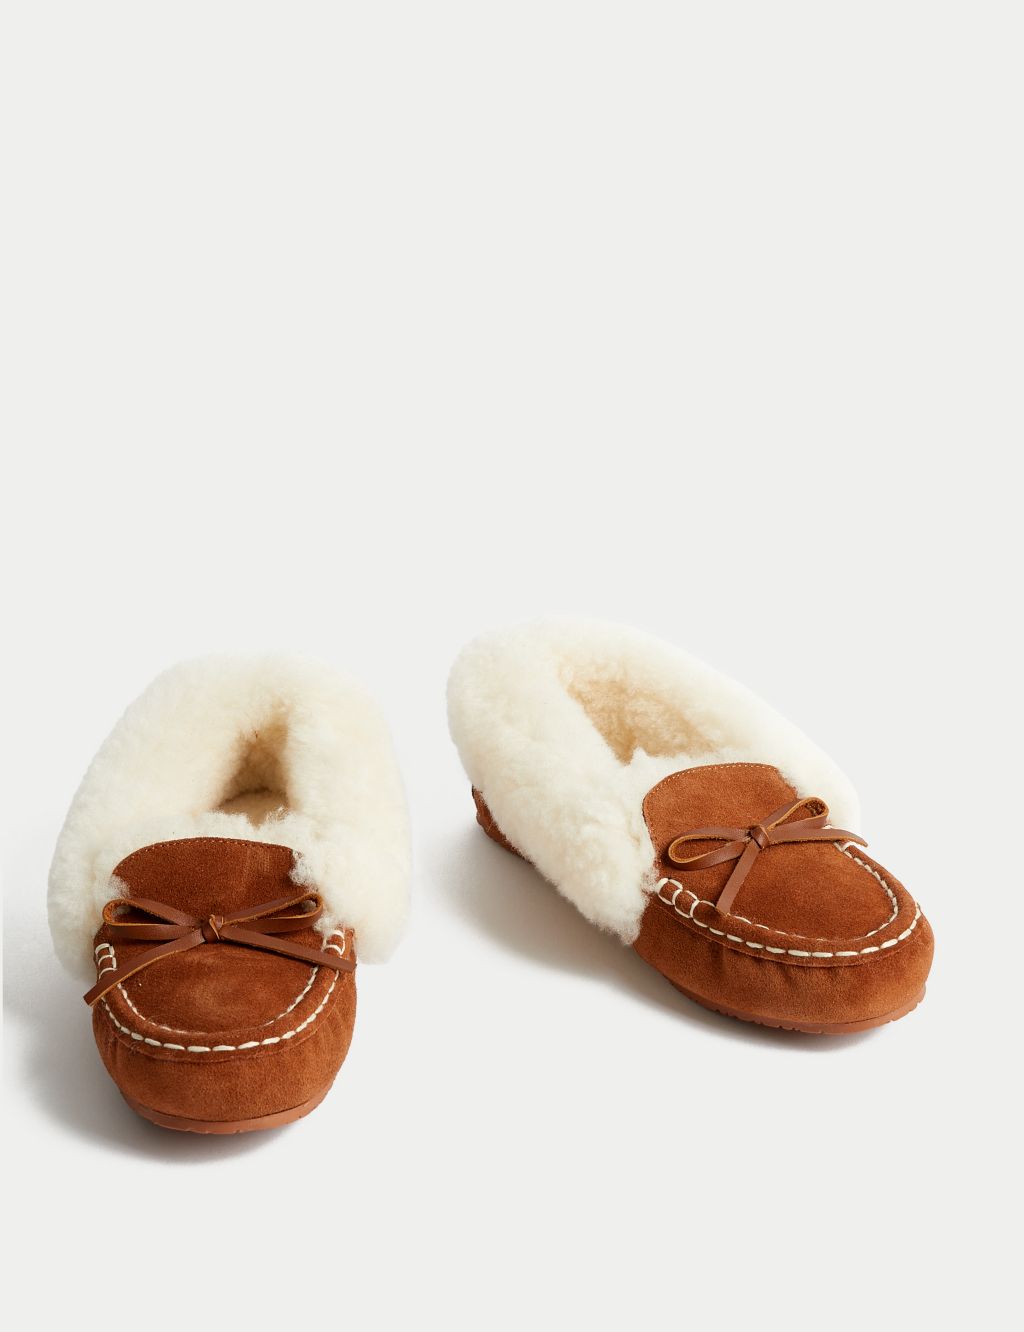 Suede Shearling Cuff Moccasin Slippers image 2